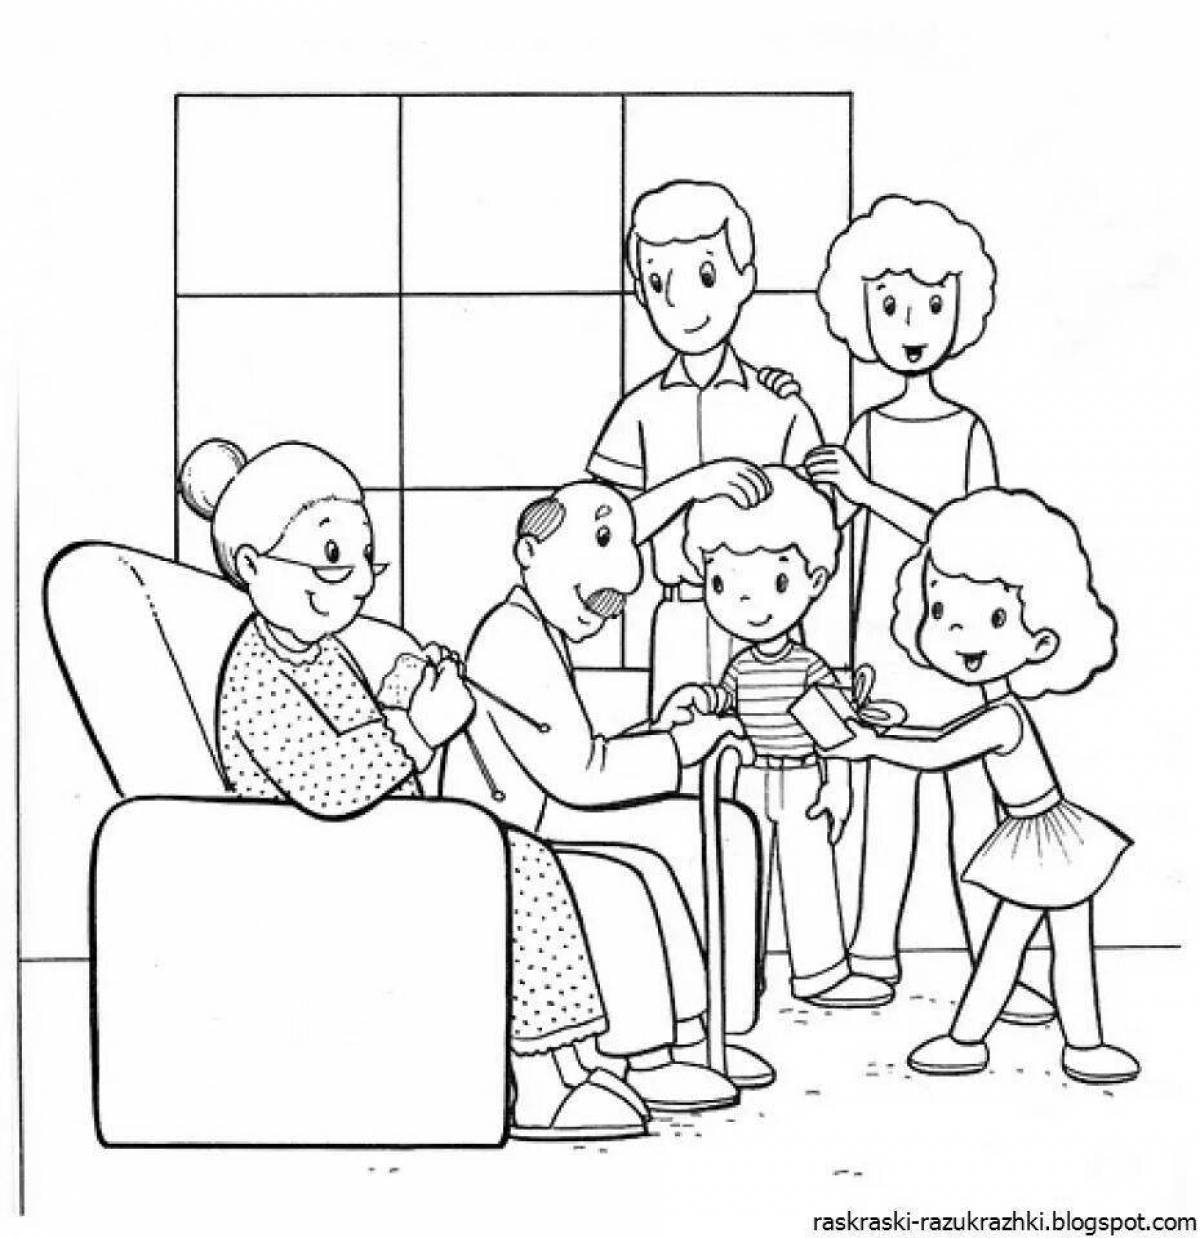 Fancy family coloring book for 7 year olds